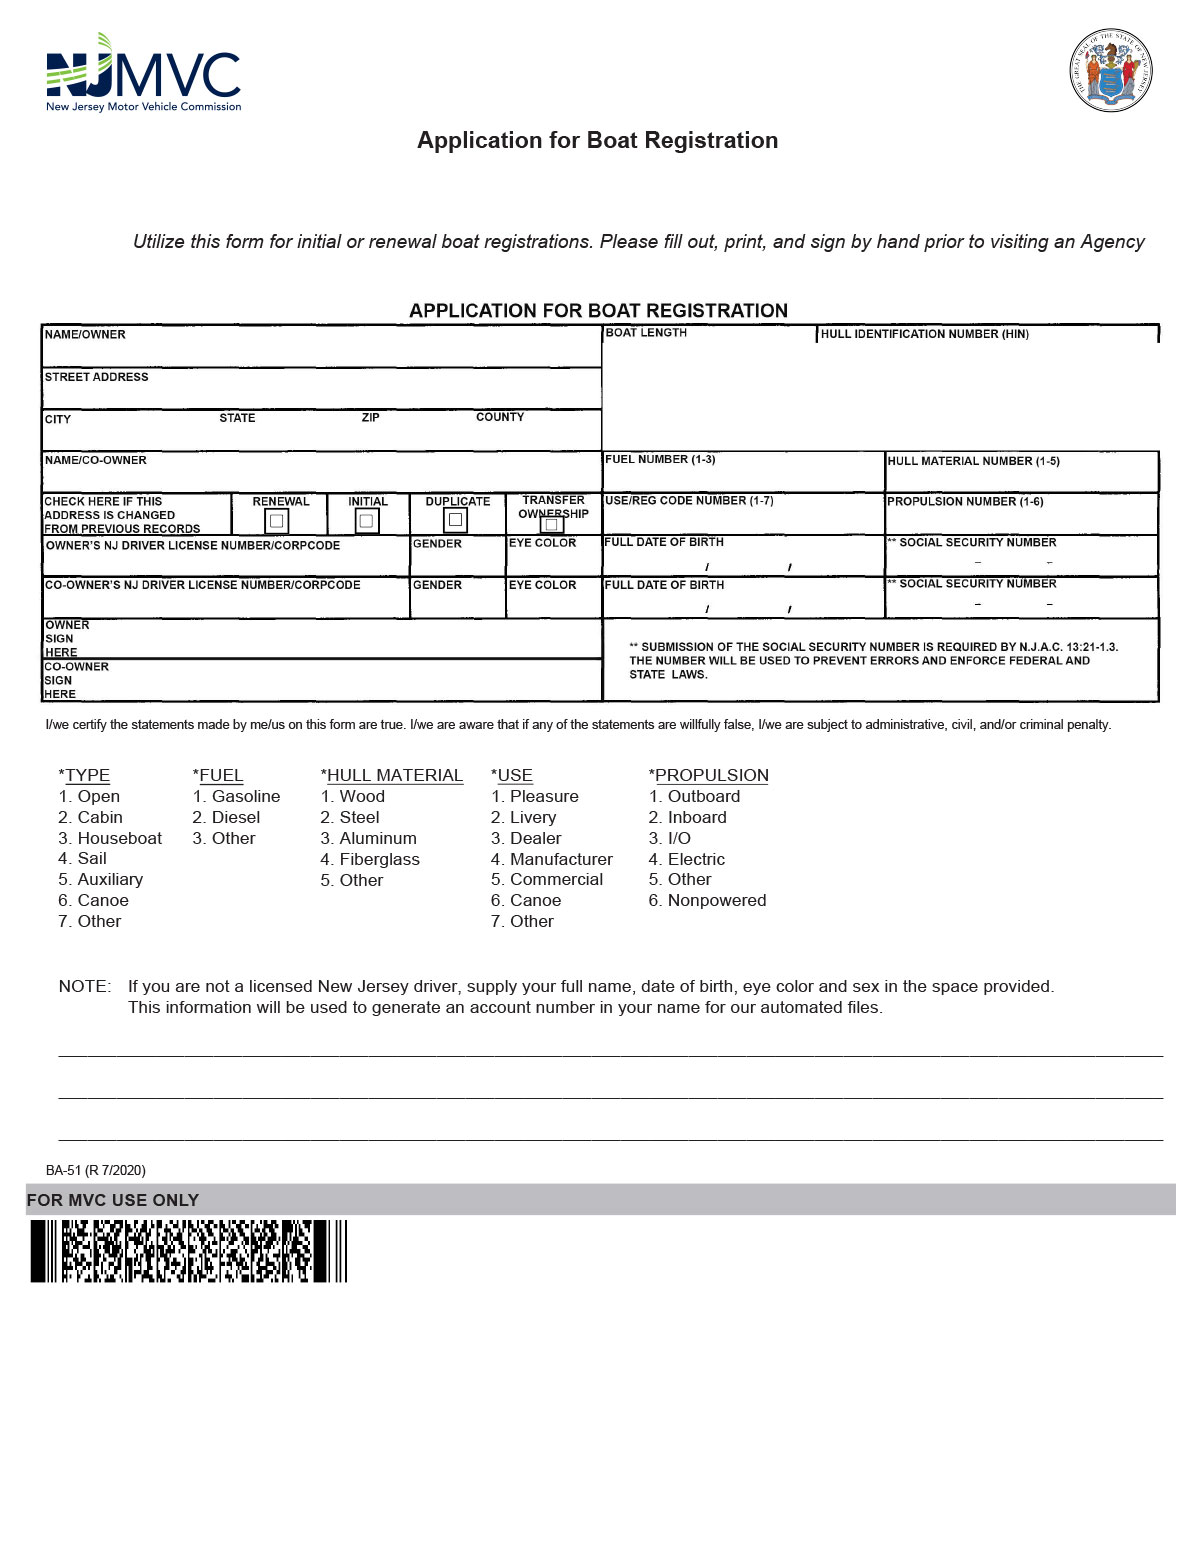 new-jersey-bill-of-sale-form-templates-free-samples-pandadoc